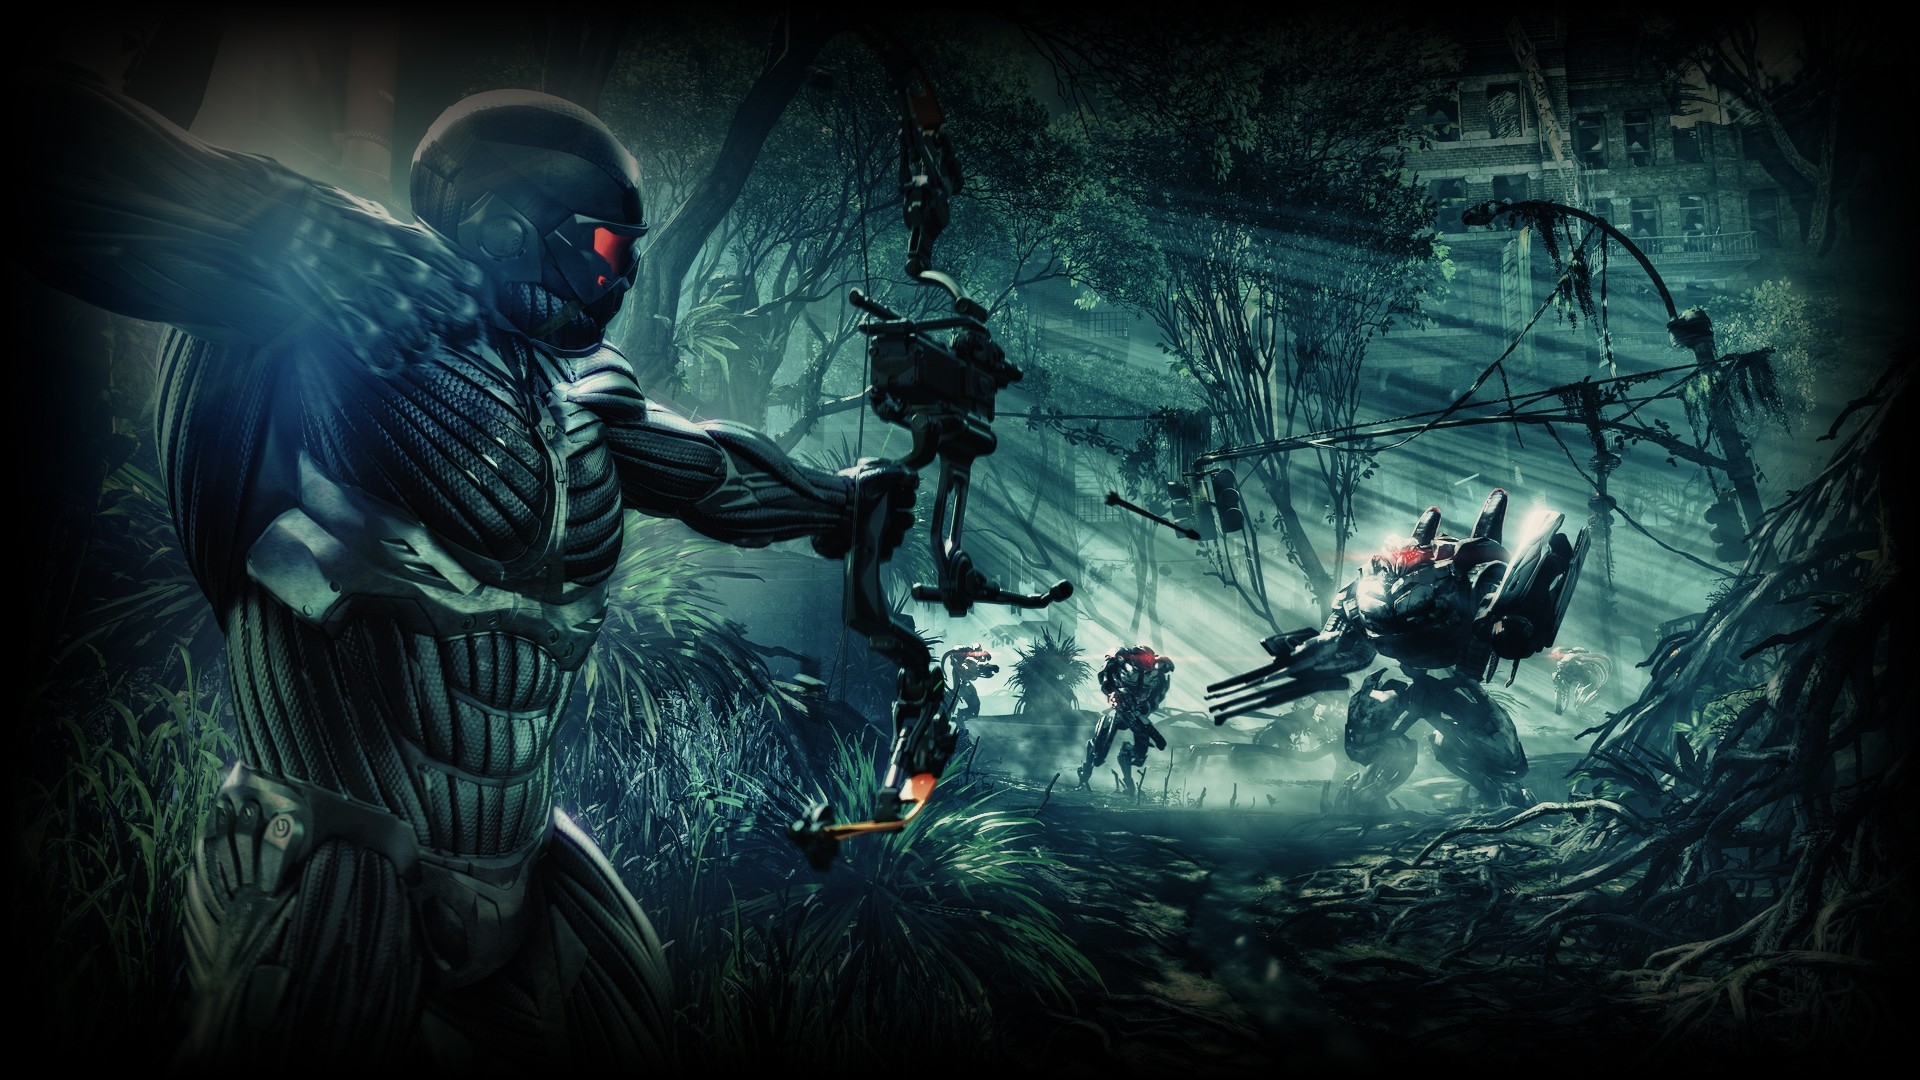 soldiers video games jungle robots weapons bow weapon crysis 3 1920x1080 wallpaper_www.wallpap...jpg